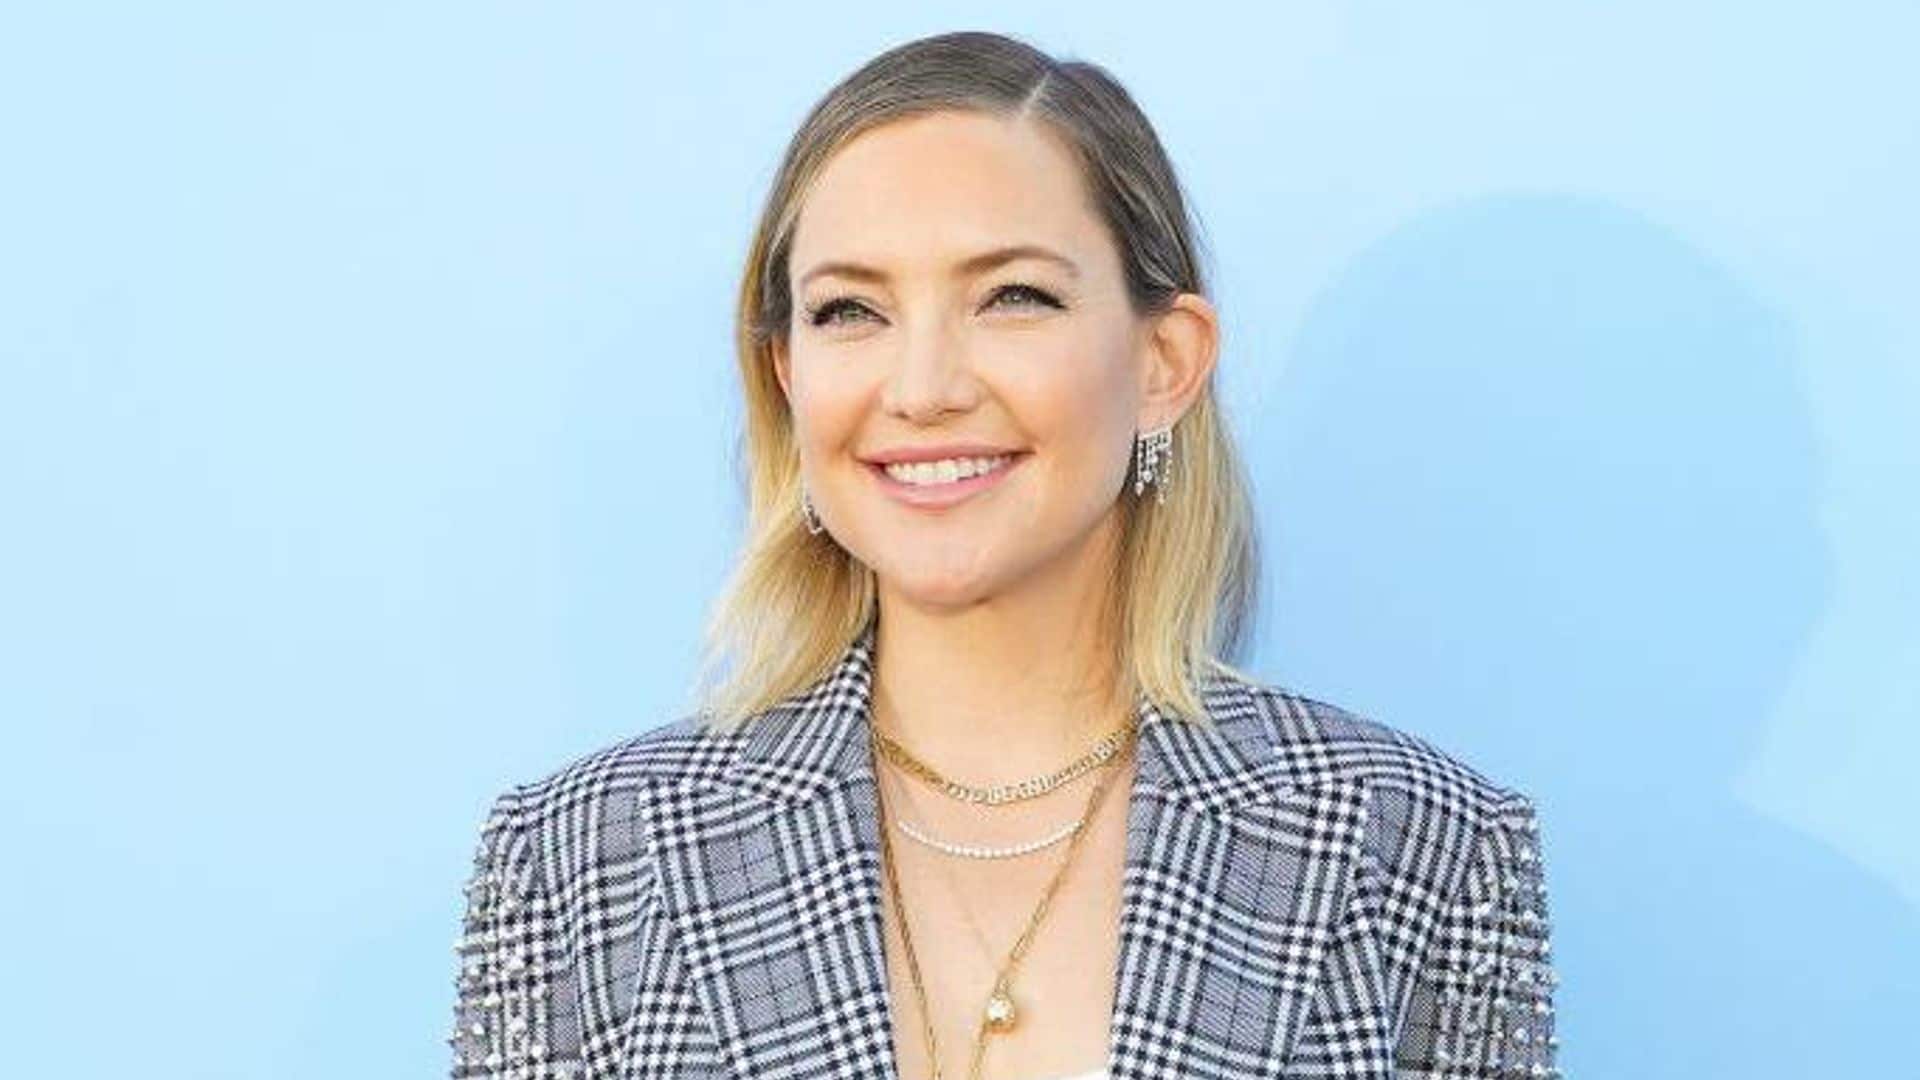 Kate Hudson looks stunning makeup-free while in sweats and glasses in a relatable Instagram post